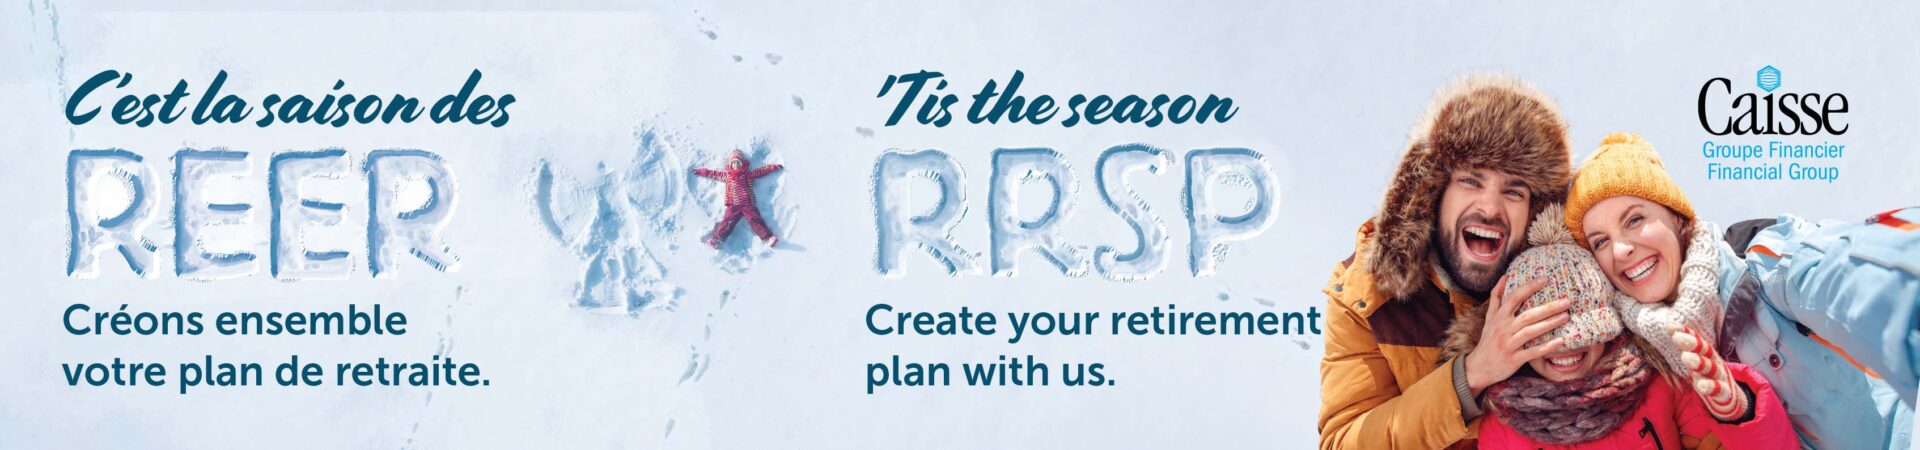 Caisse Superboard - Mother smiling with child - "'Tis the season RRSP Create your retirement plan with us."